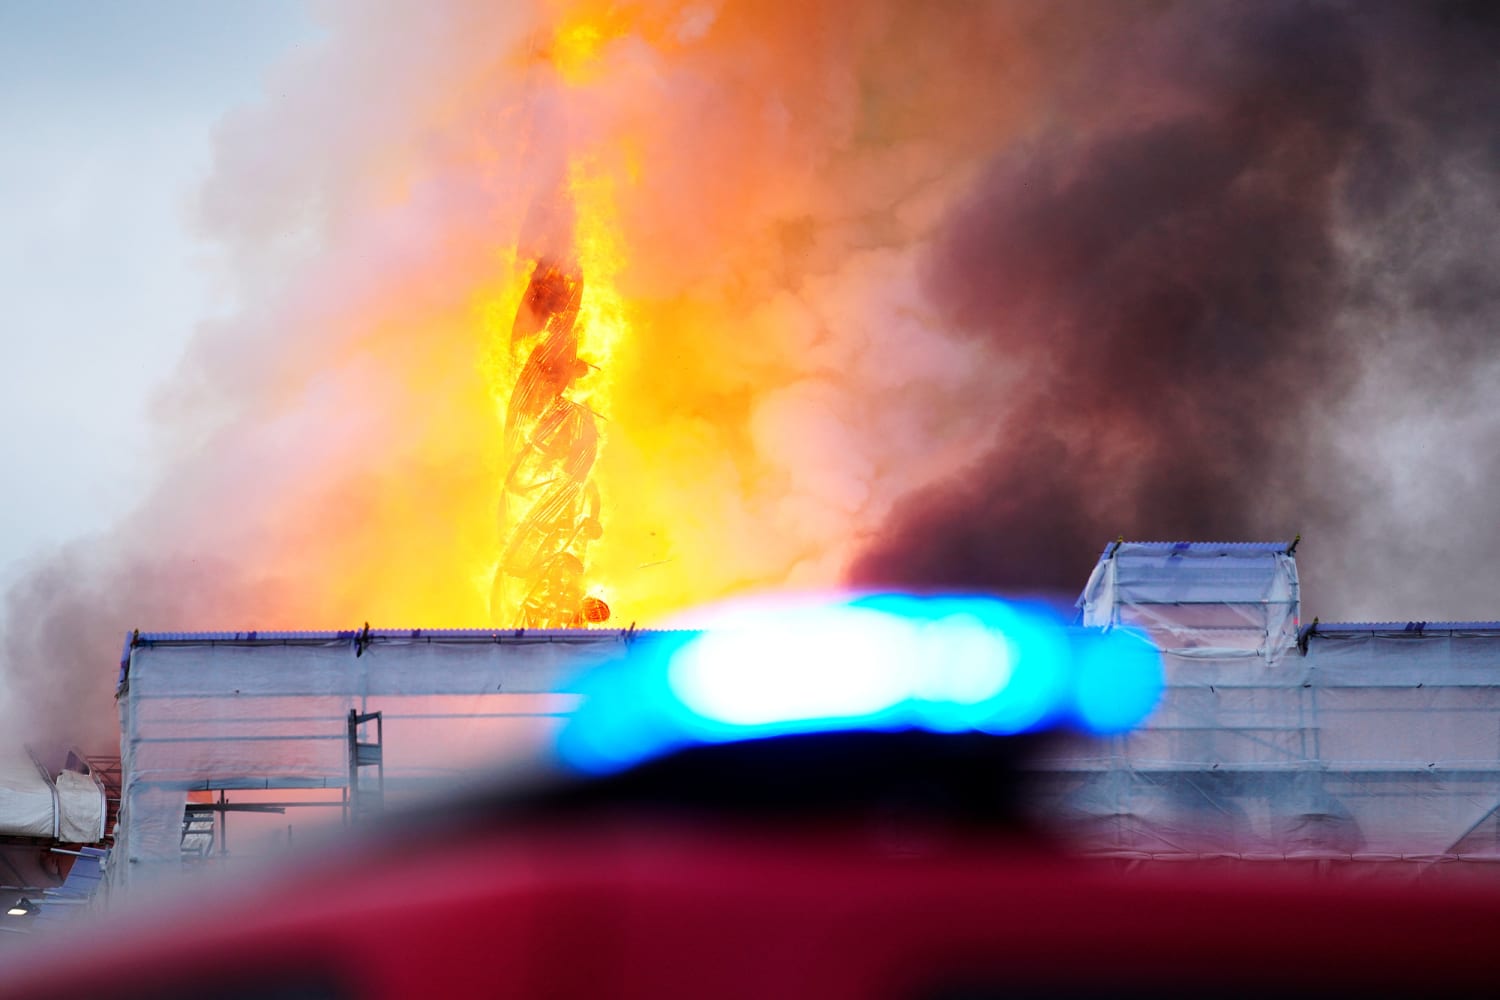 Copenhagen caught fire, and the stock exchange tower collapsed